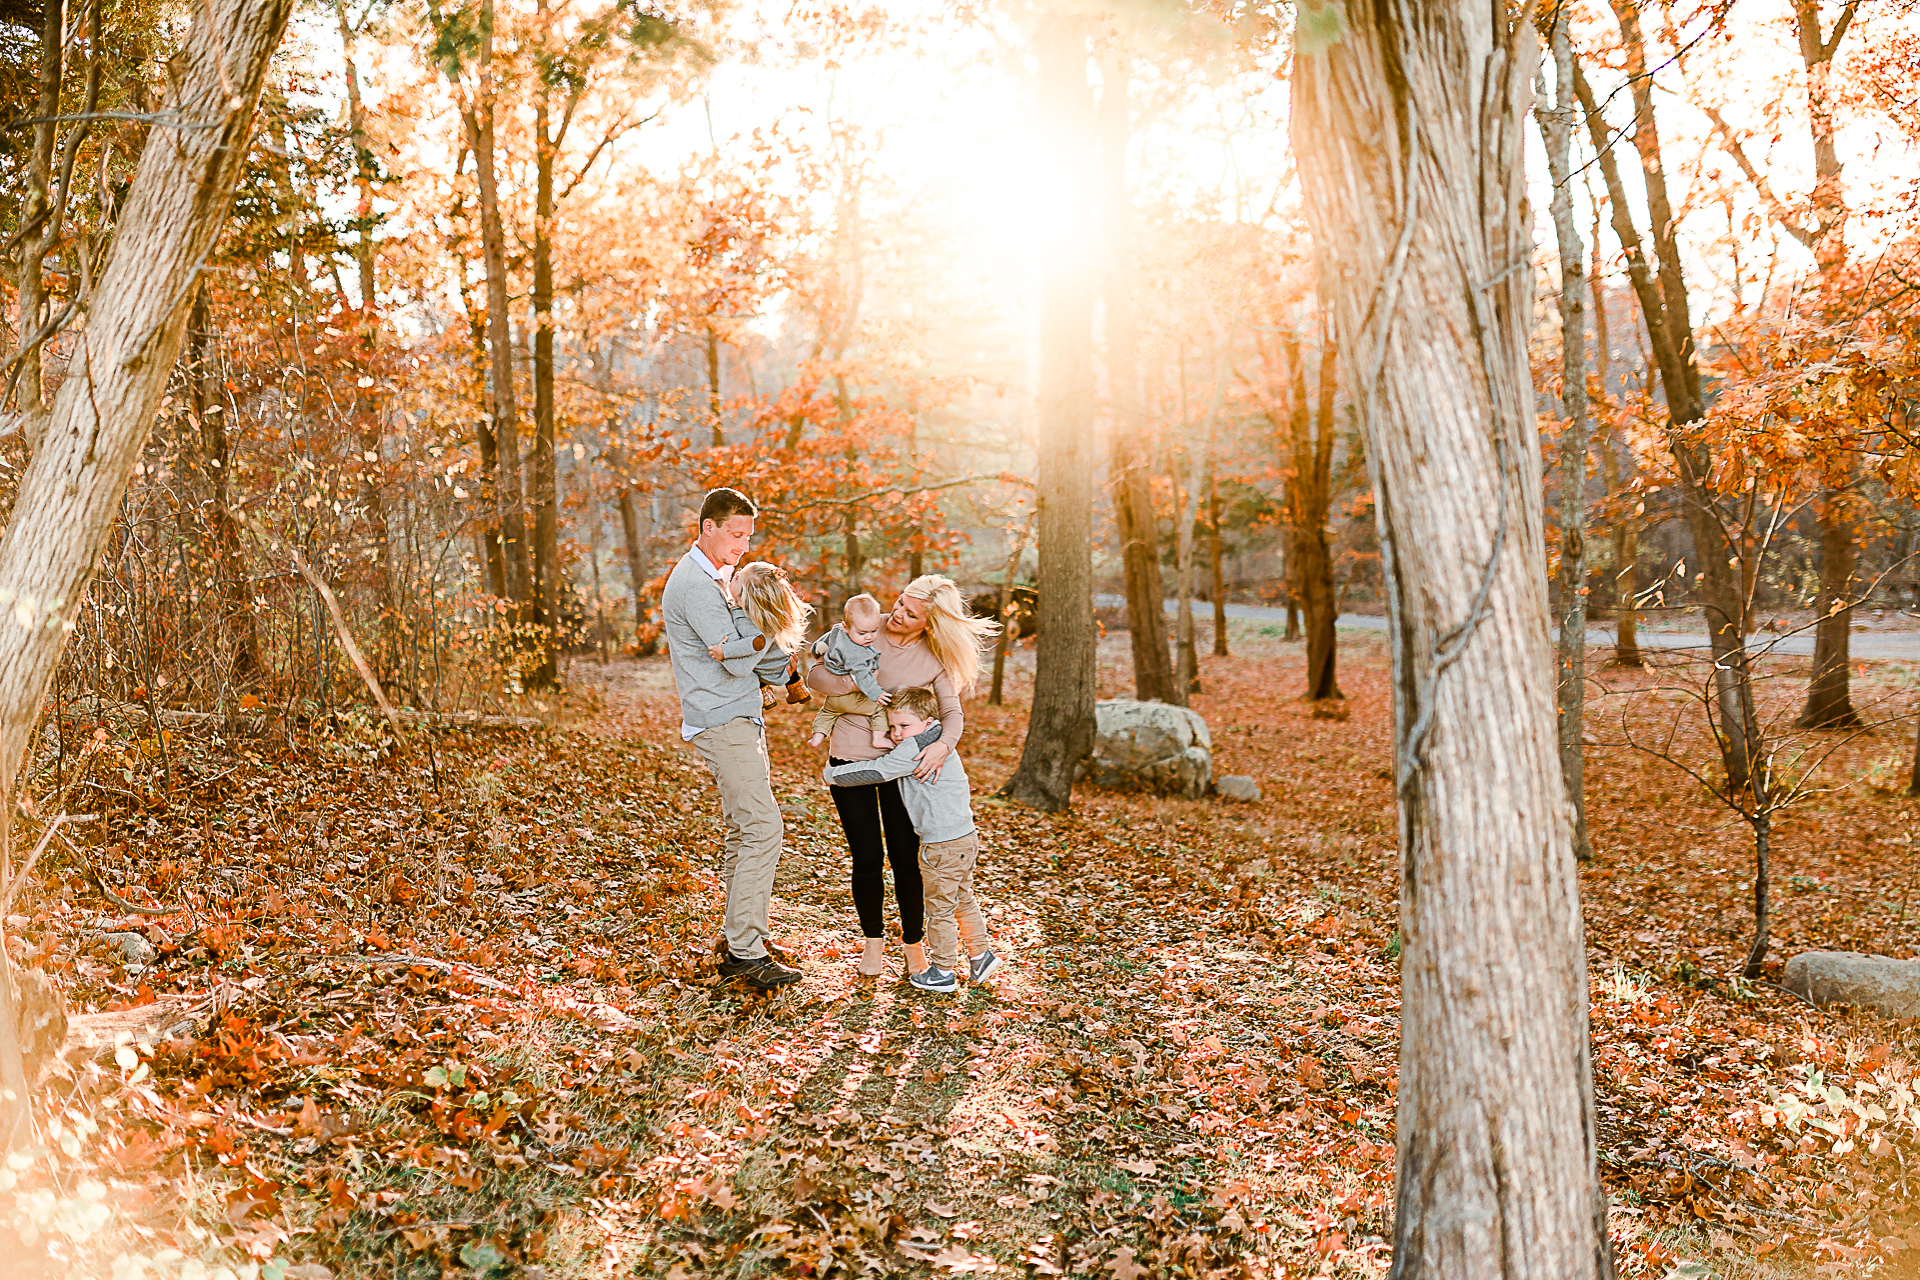 Photo by Norwell Photographer Christina Runnals | Family dancing in an autumn forest with sunlight streaming through the trees